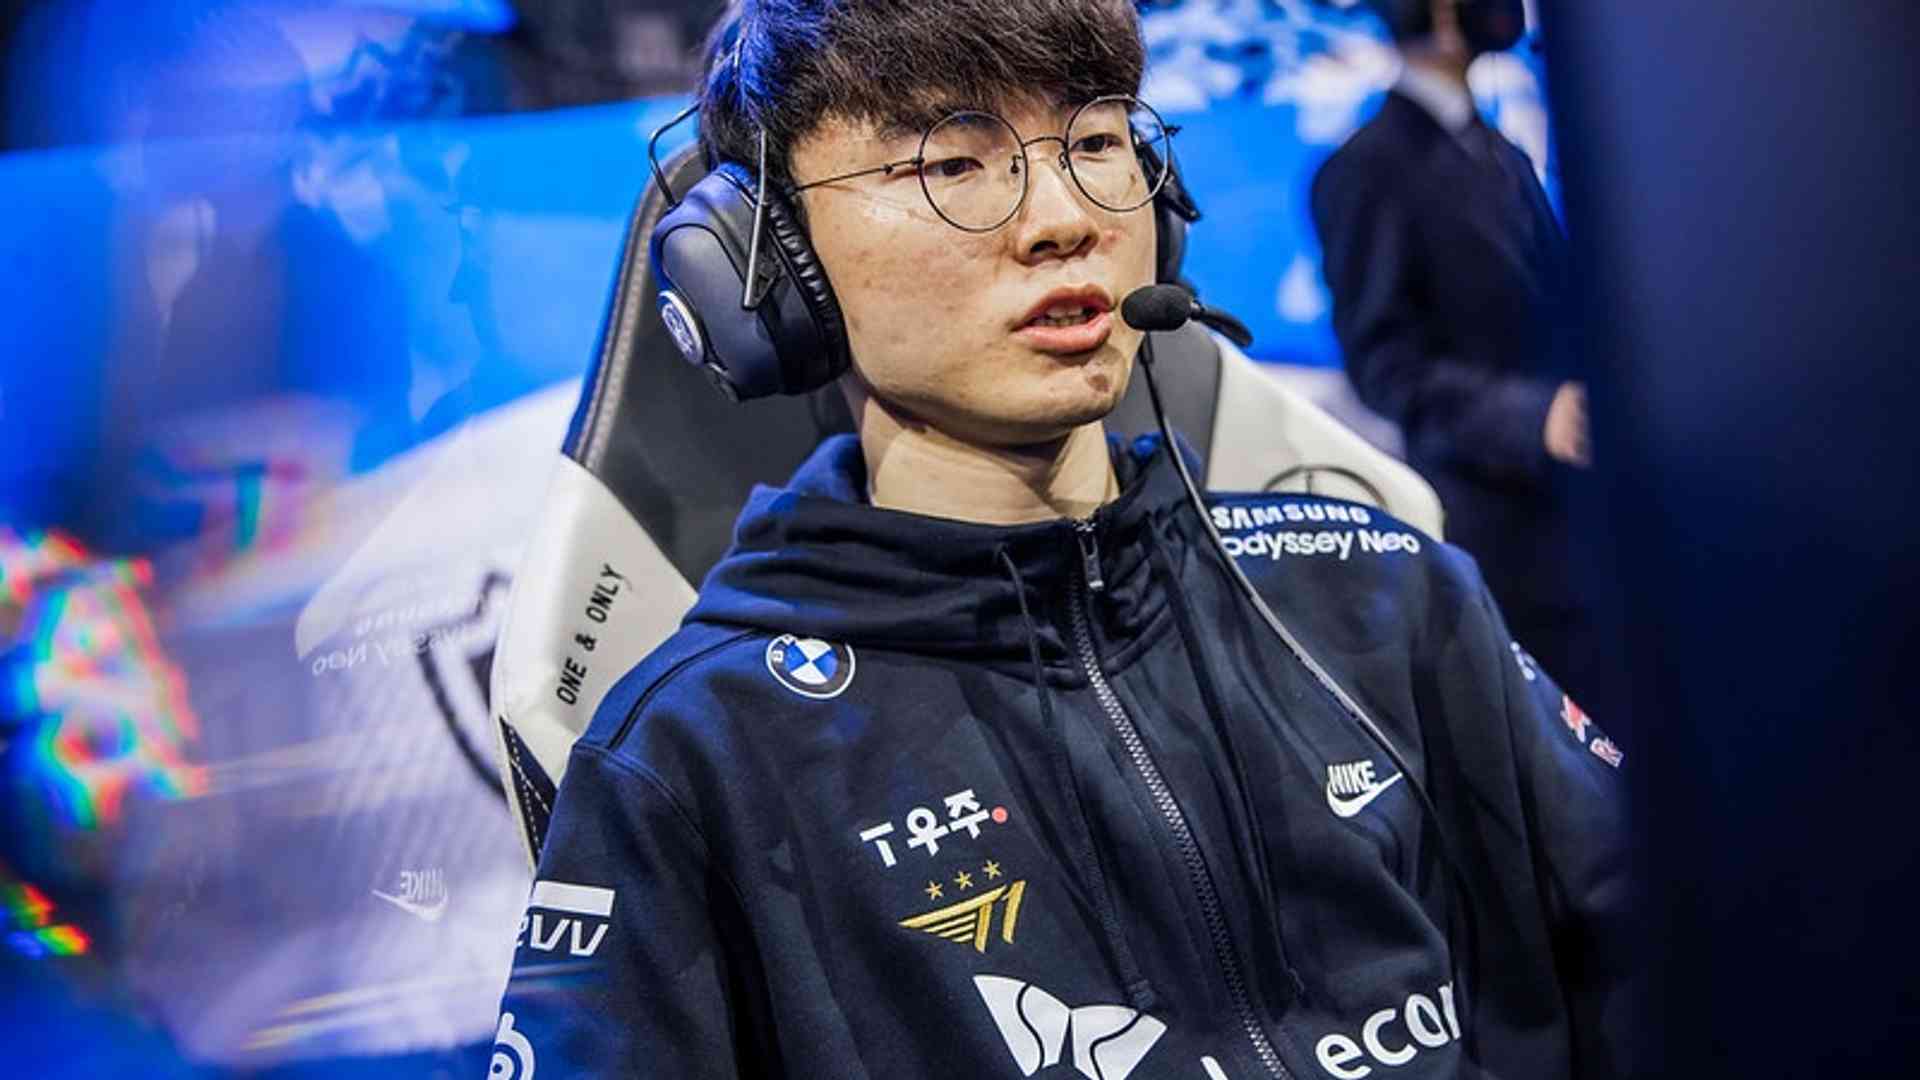 League of Legends Worlds: Can 'Golden Left Hand' top 'Faker' to